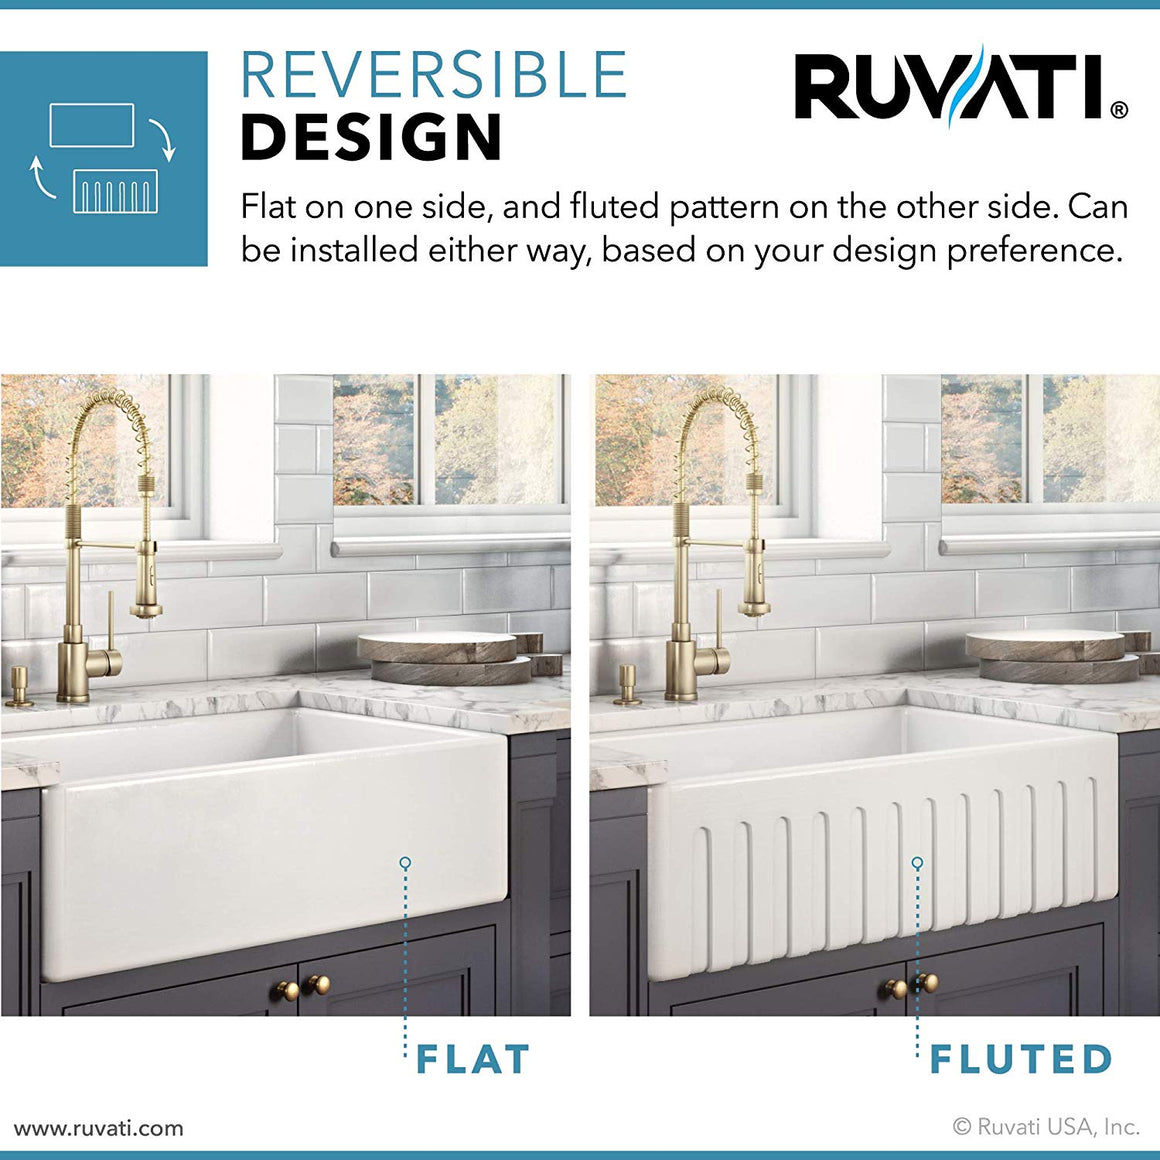 Ruvati 30 x 20 inch Fireclay Reversible Farmhouse Apron-Front Kitchen Sink Single Bowl - Biscuit - RVL2100BS